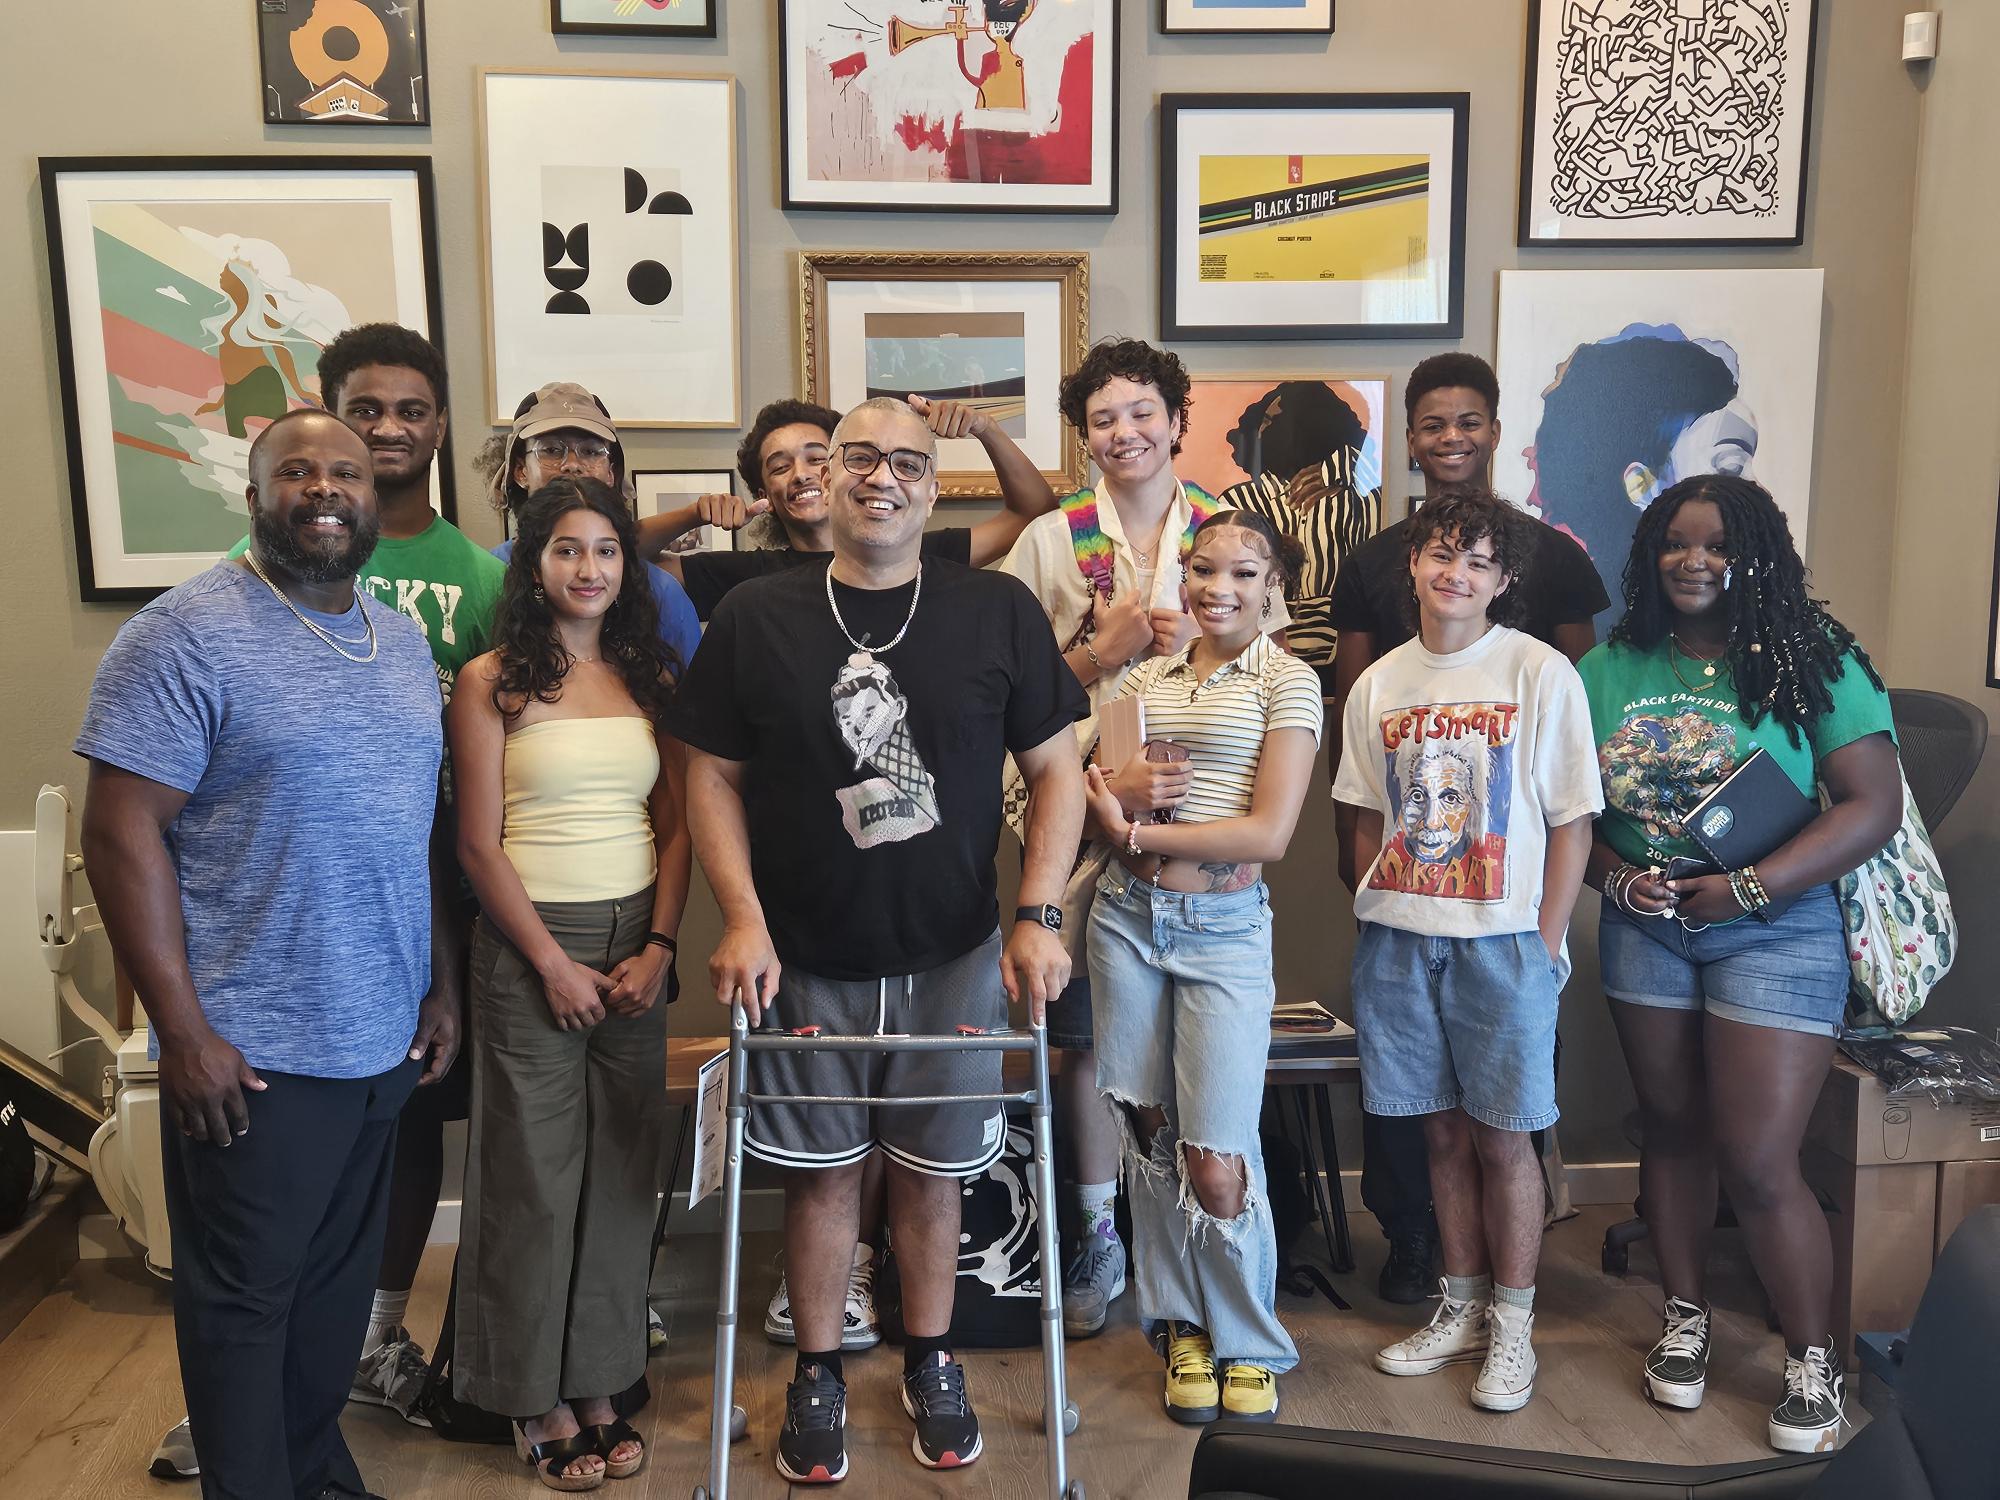 Group photo of Fresh perspectives cohort with artist Damon Brown with many graphics hung on wall behind them.